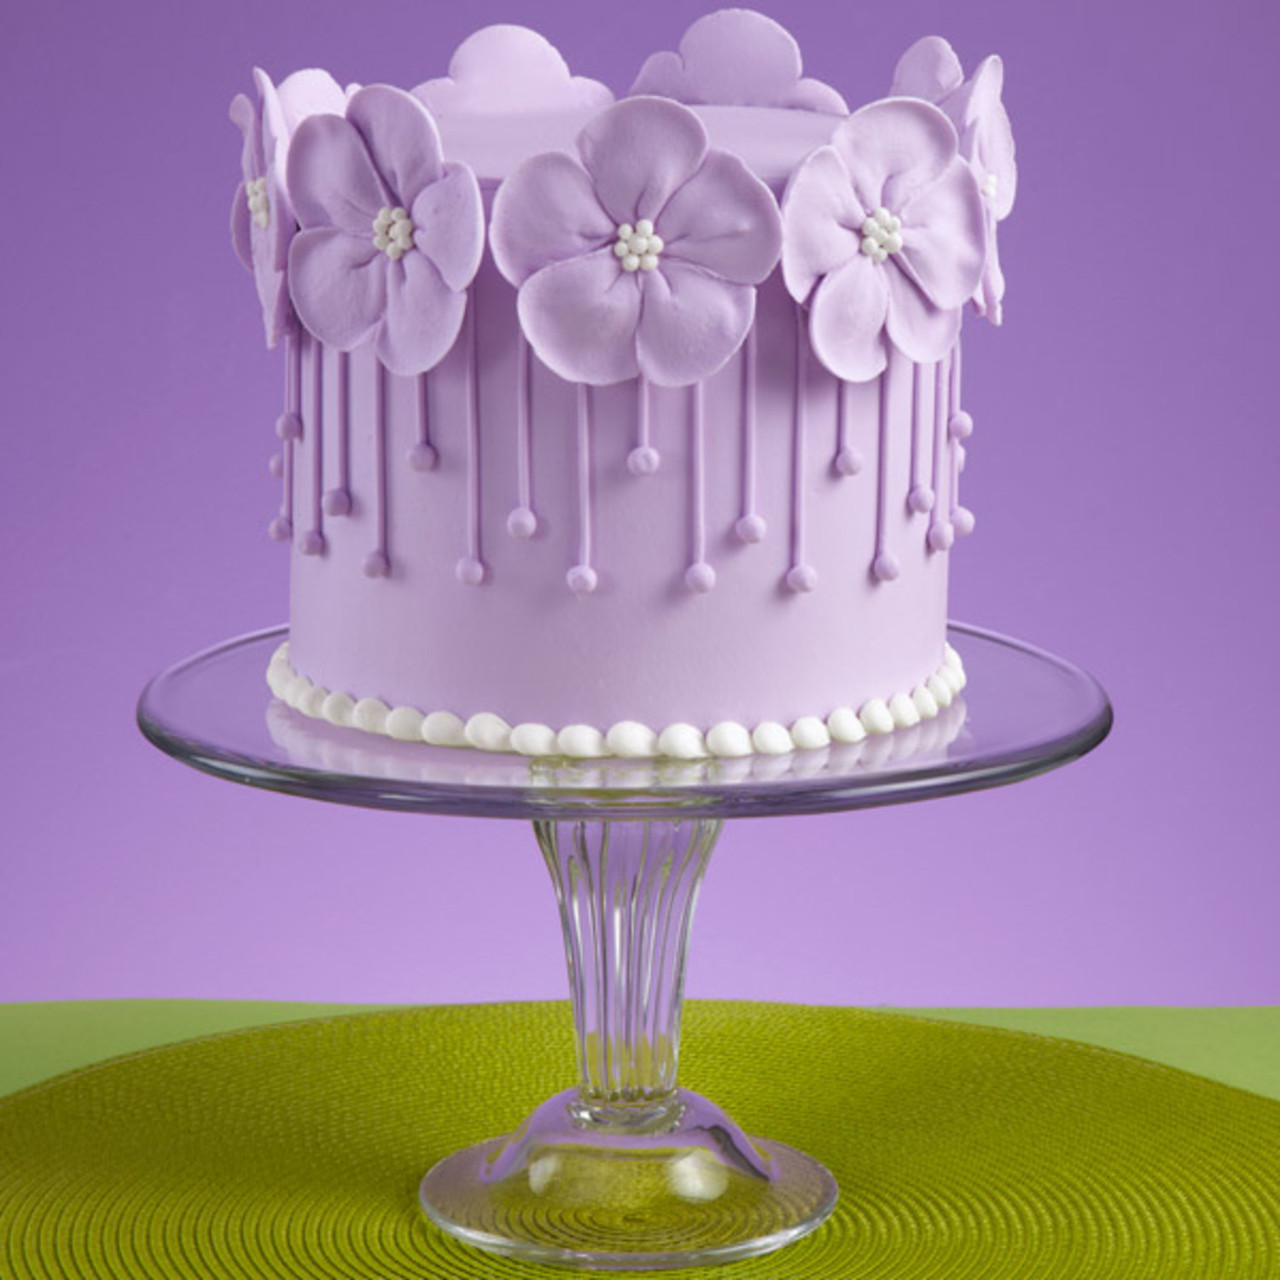 Beautiful Birthday Cake In Purple Color Stock Photo, Picture and Royalty  Free Image. Image 135151561.